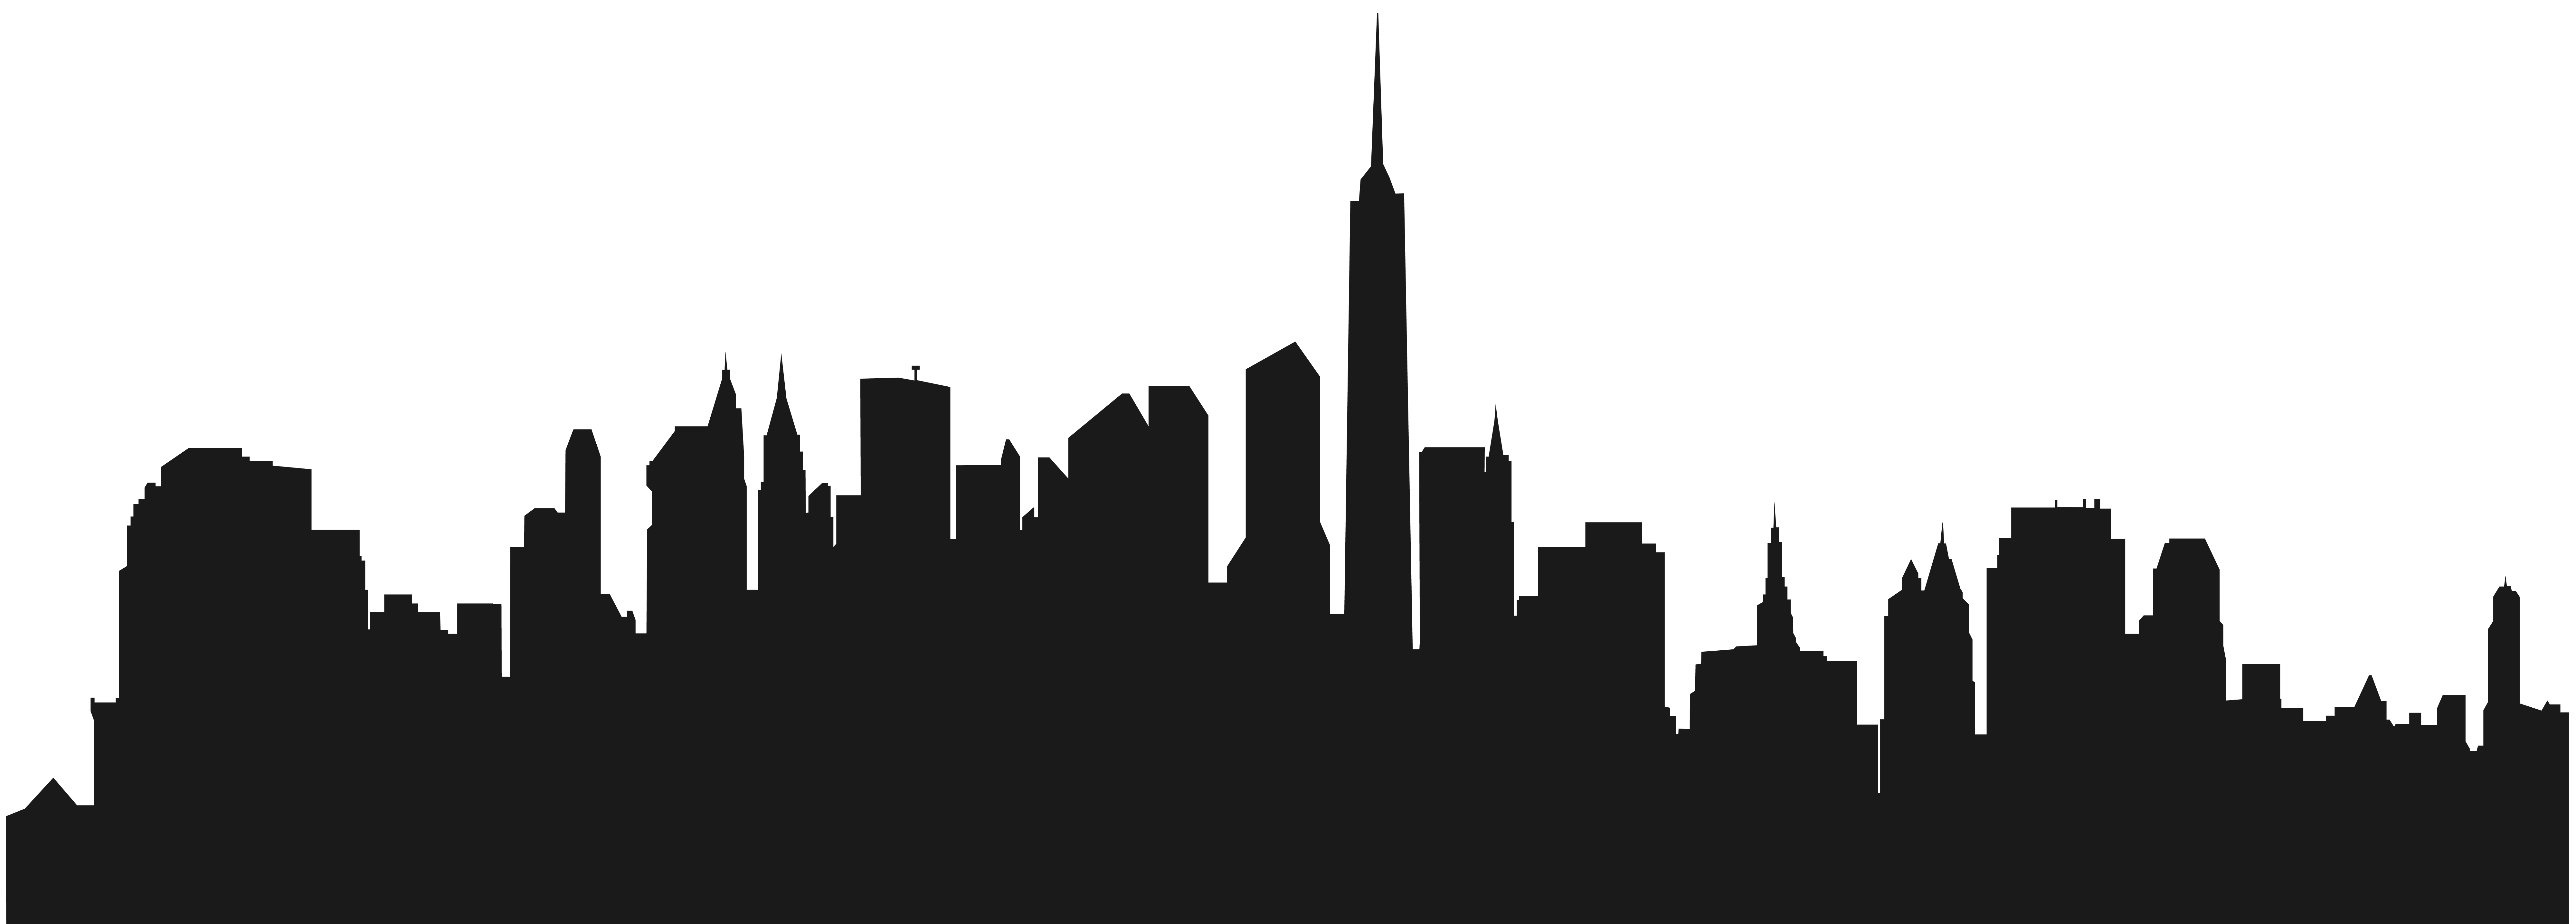 New York City Skyline Silhouette Clip art - CITY png download - 8000* ...